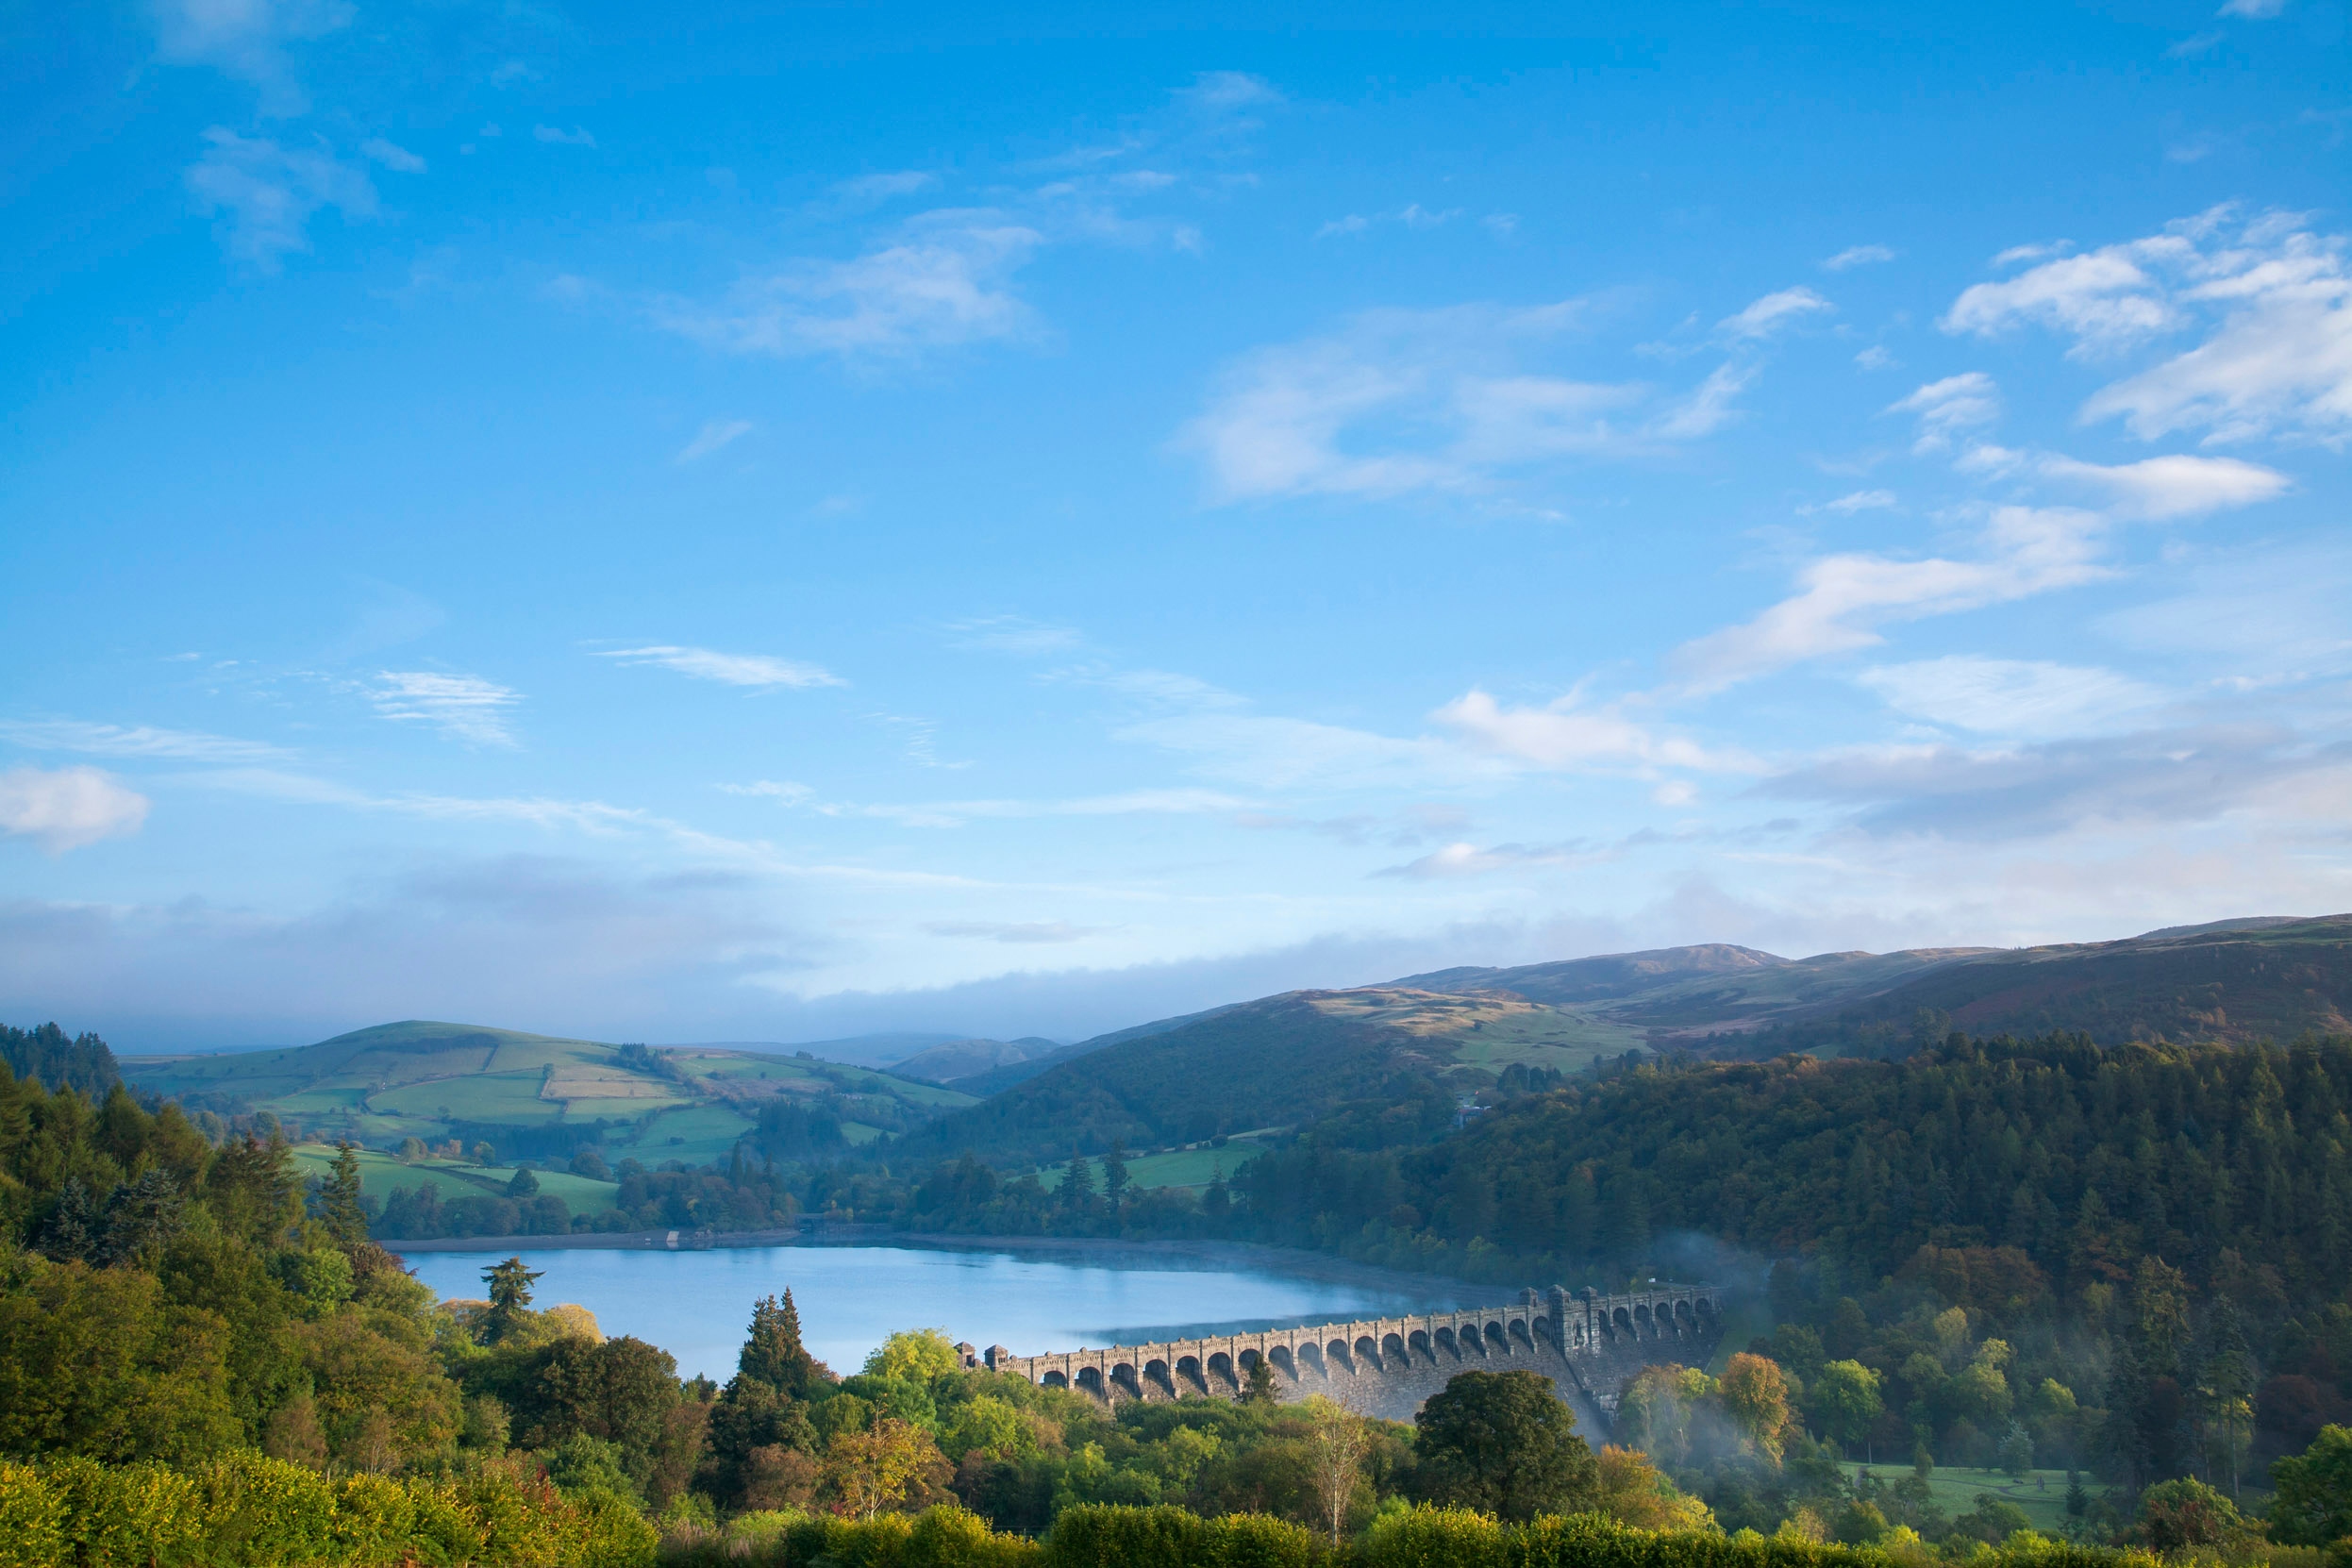 A view of Lake Vyrnwy and the stone wall, surrounded by trees and a blue sky with wispy white clouds.